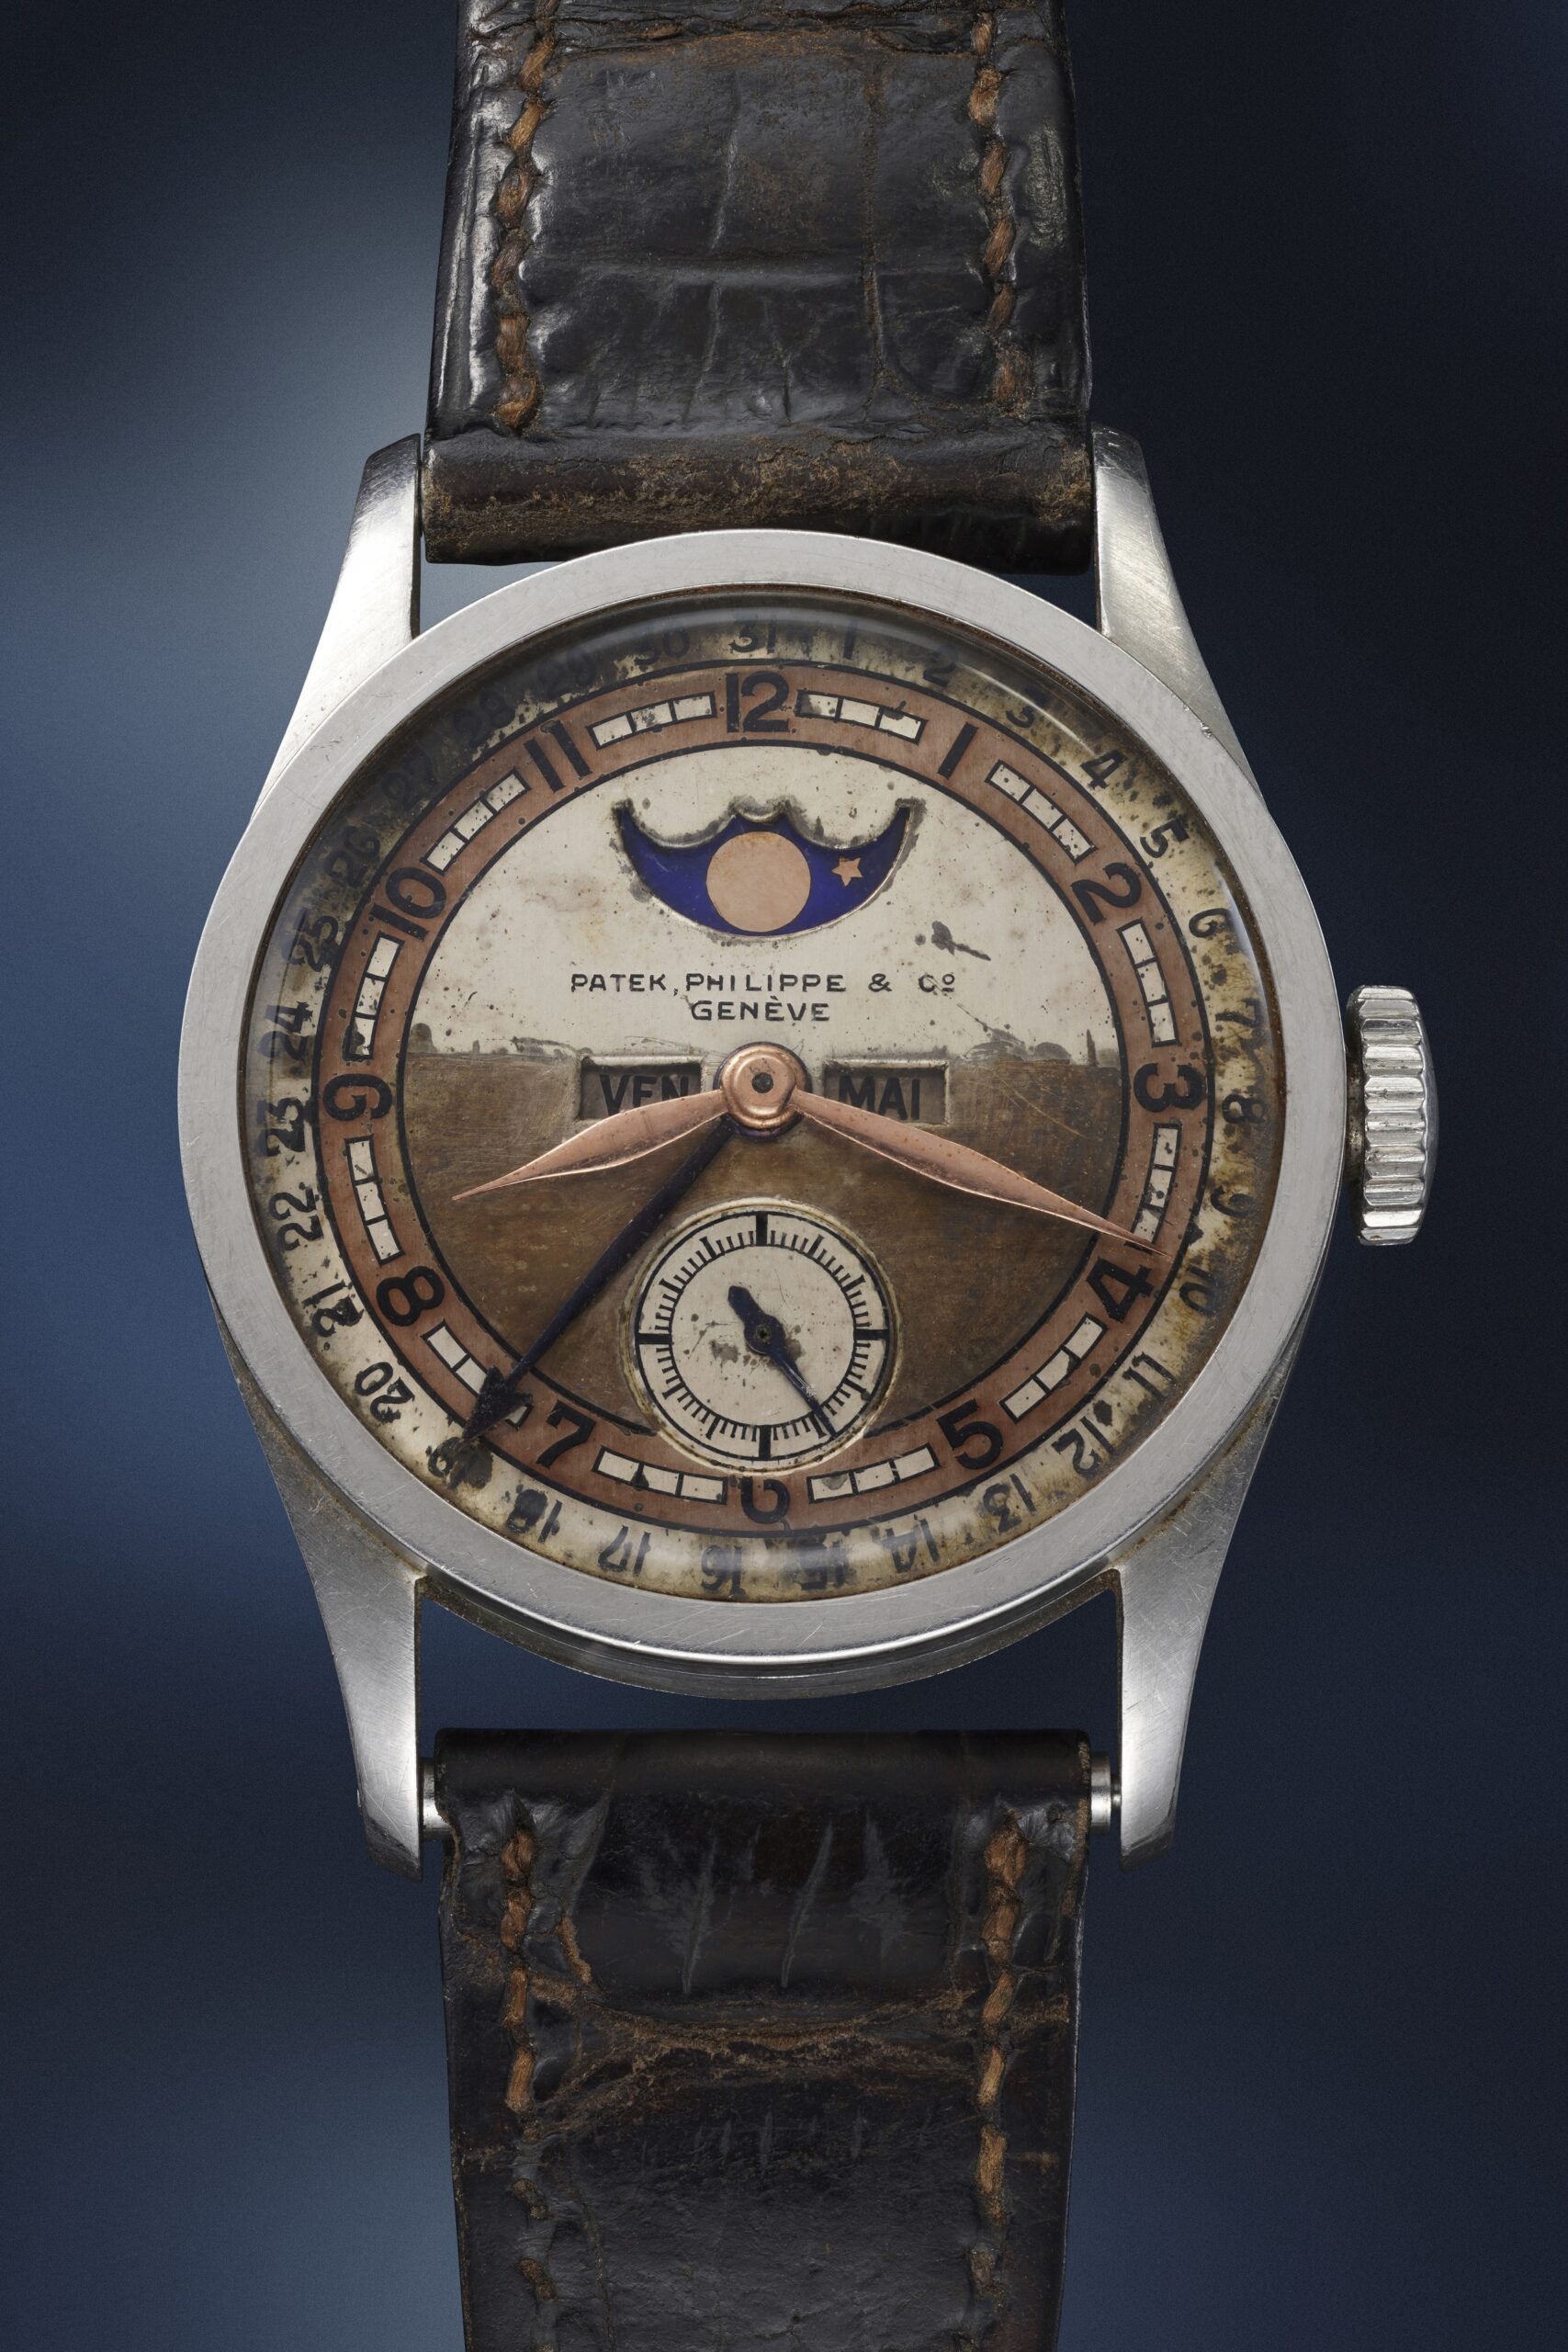 Patek philippe reference 96 quantieme lune copyright phillips jess hoffman scaled